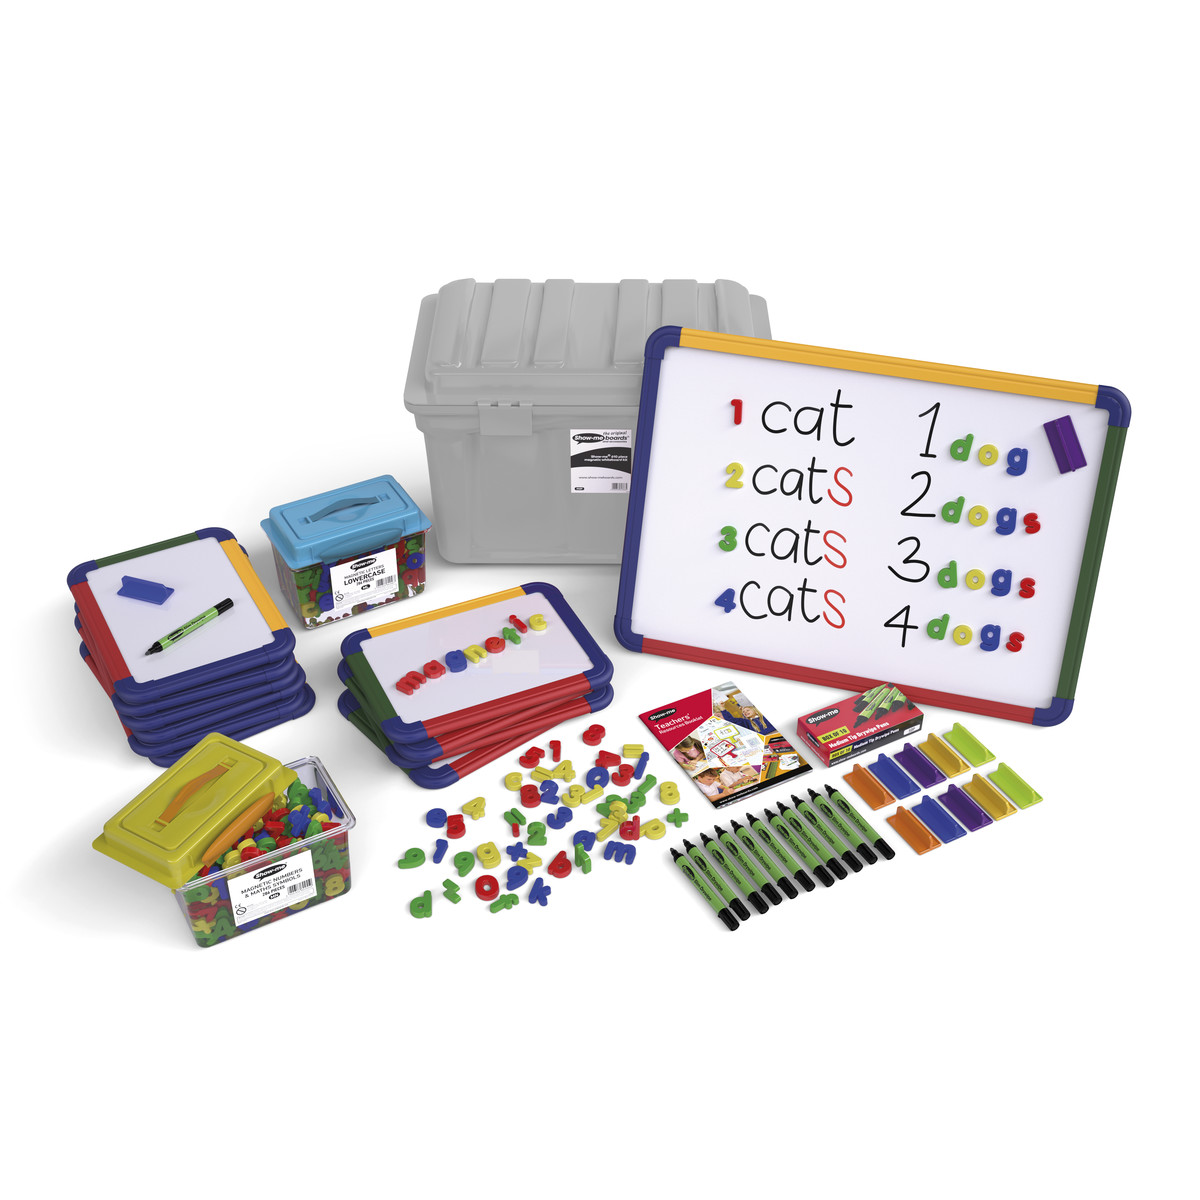 610 Piece Magnetic Whiteboard Group Pack with Accessories